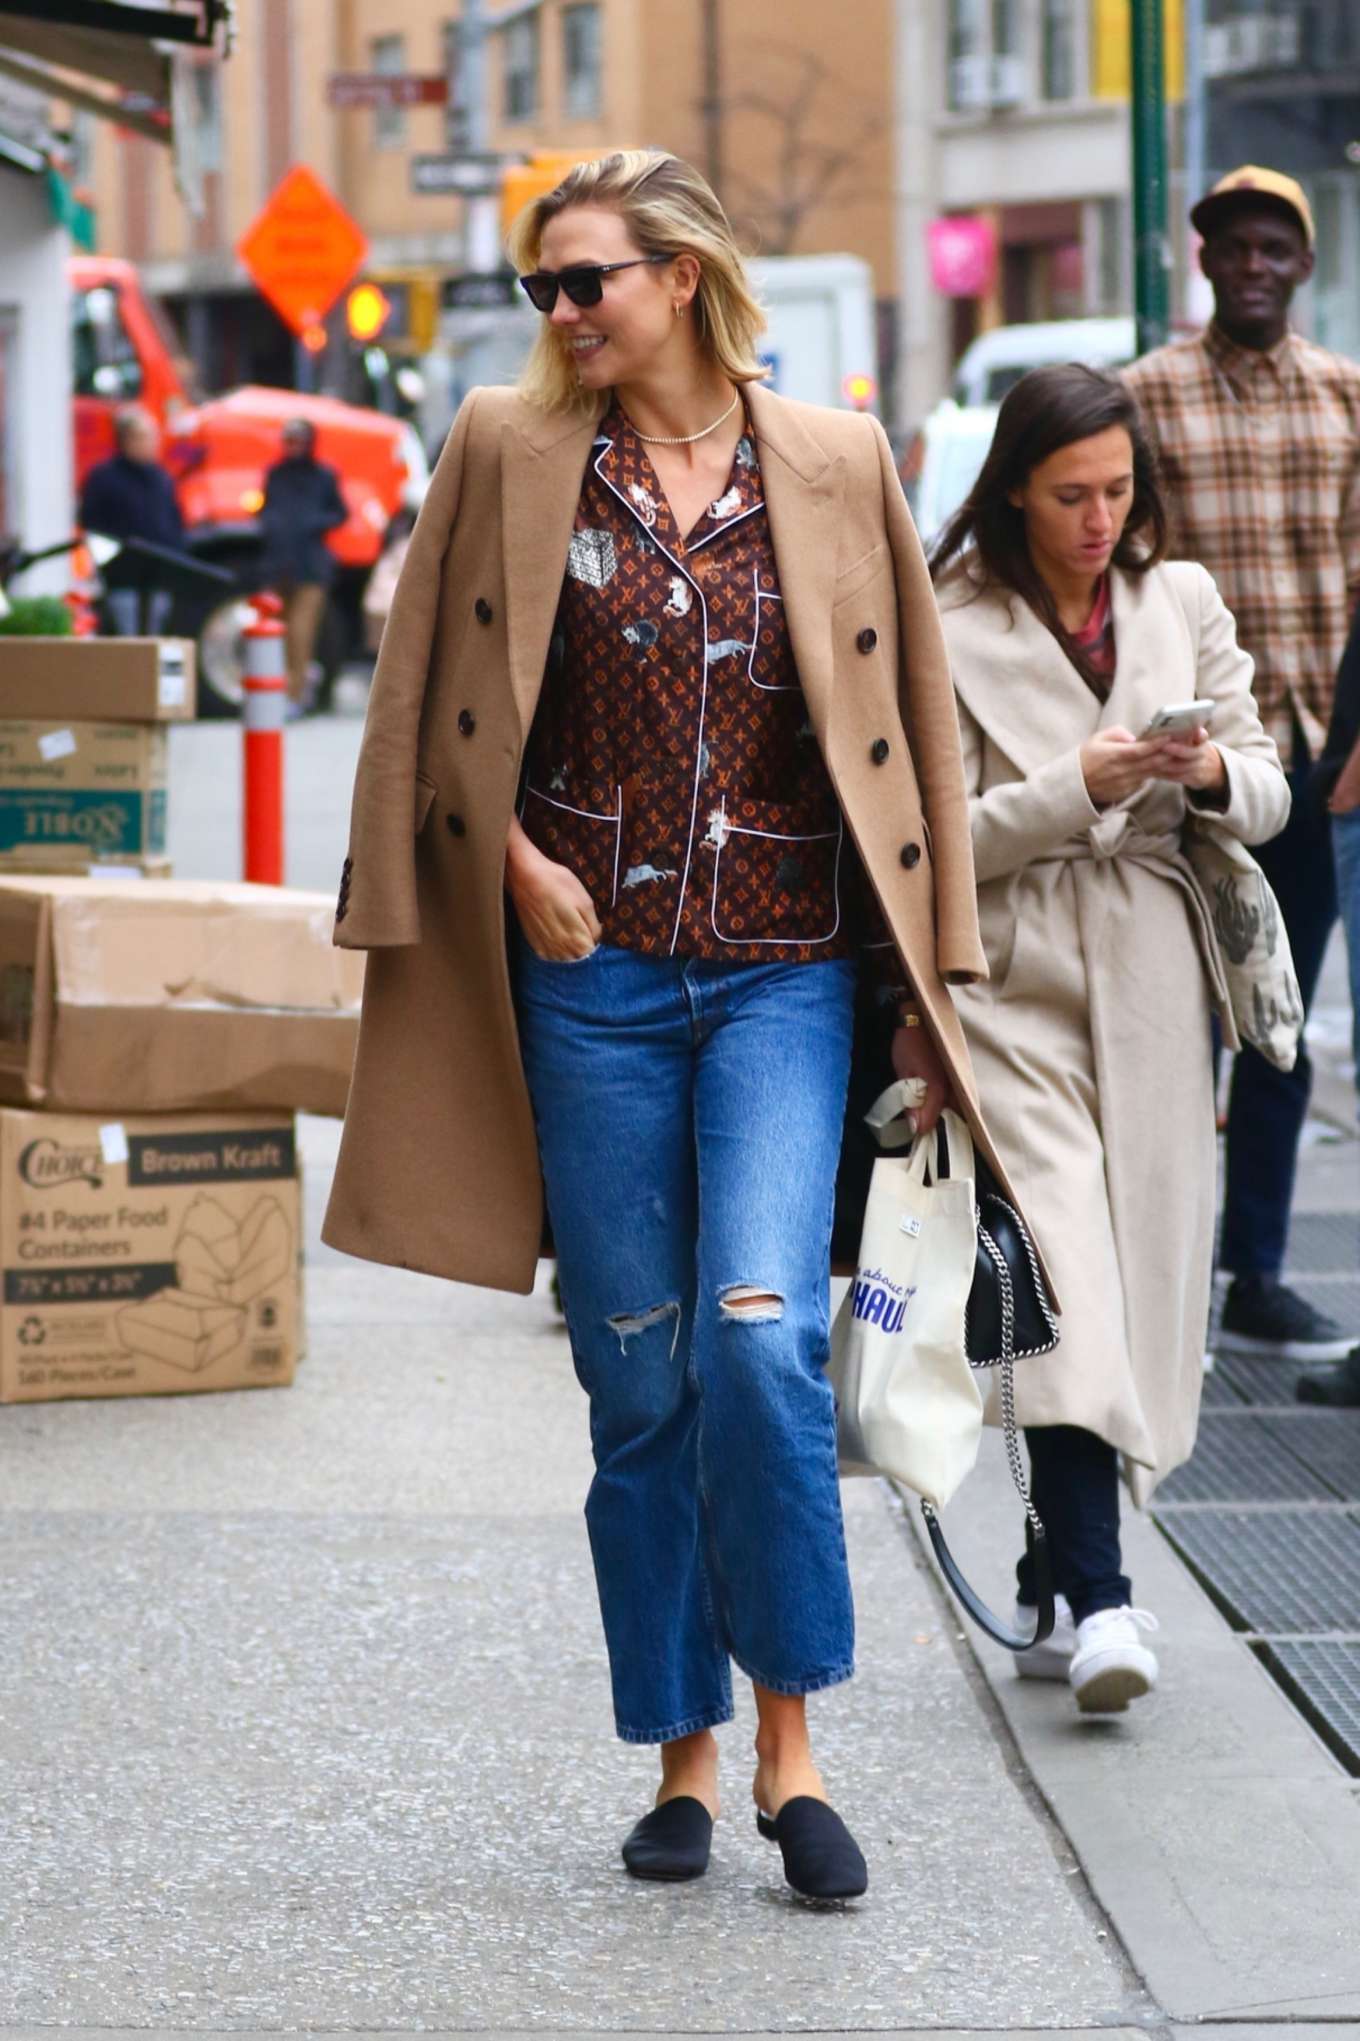 Karlie Kloss 2020 : Karlie Kloss in Ripped Jeans – Out in New York City-09